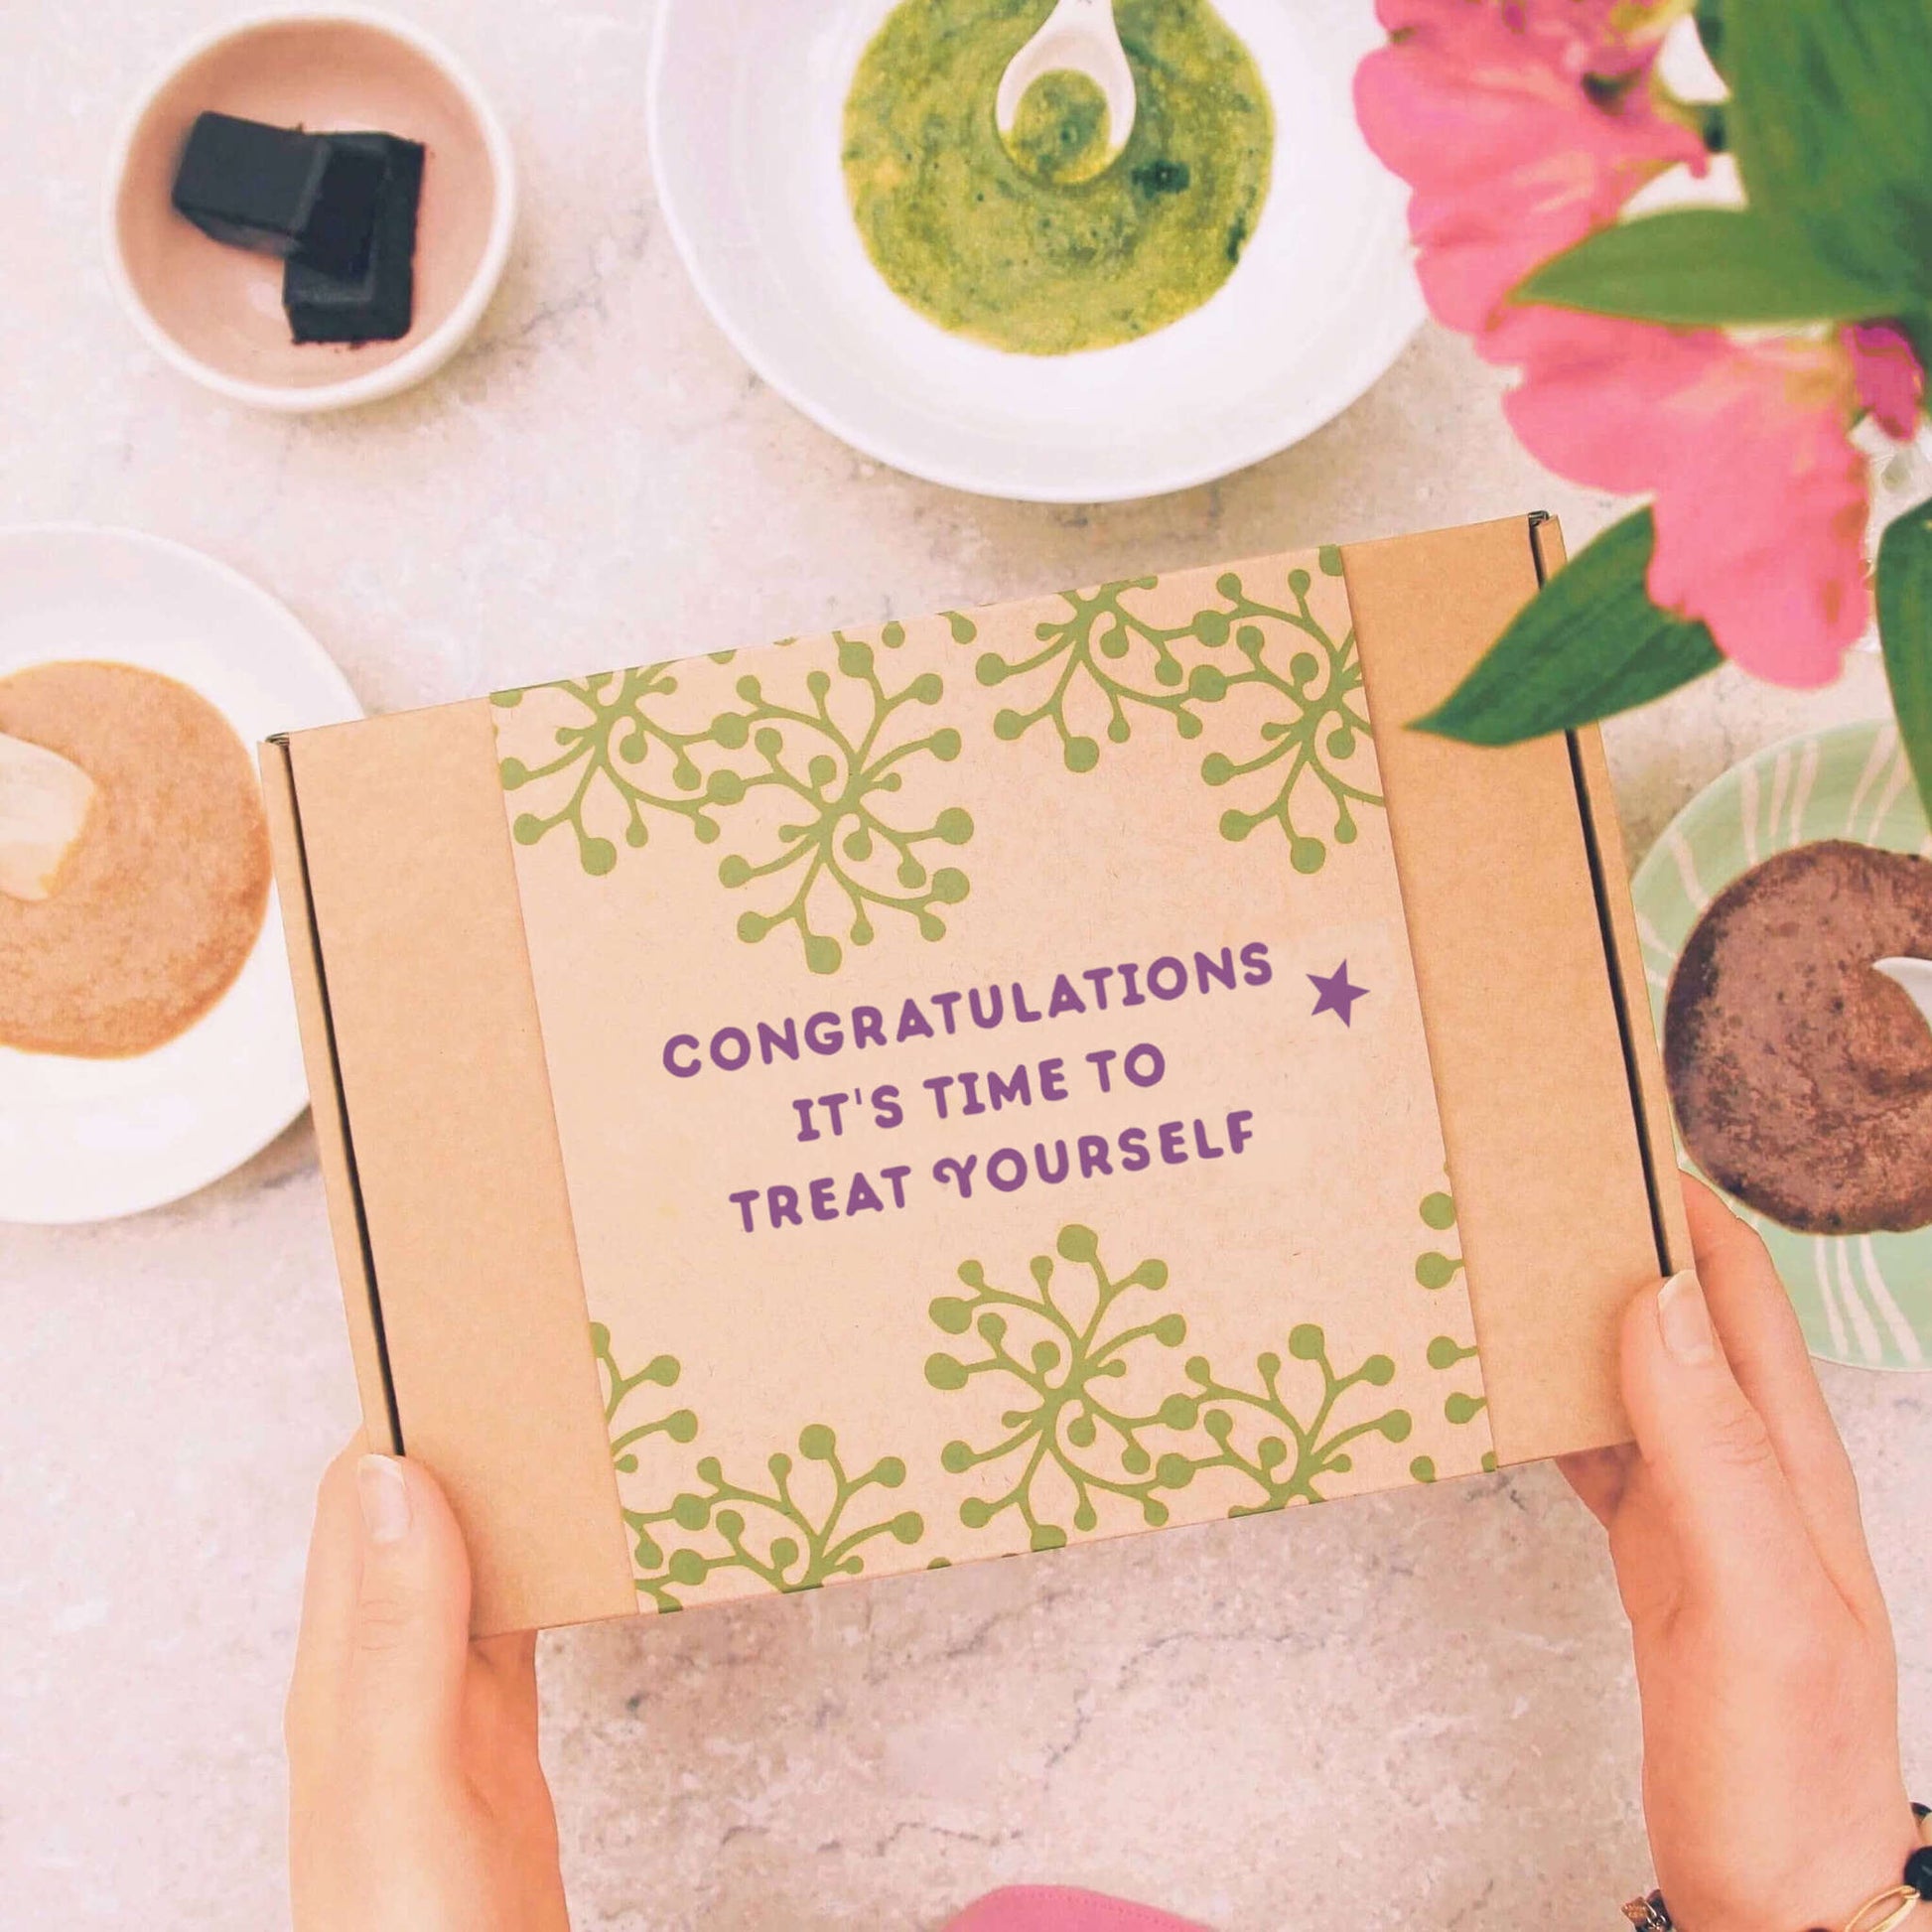 congratulations gift box showing the message "congratulations, it's time to treat yourself"